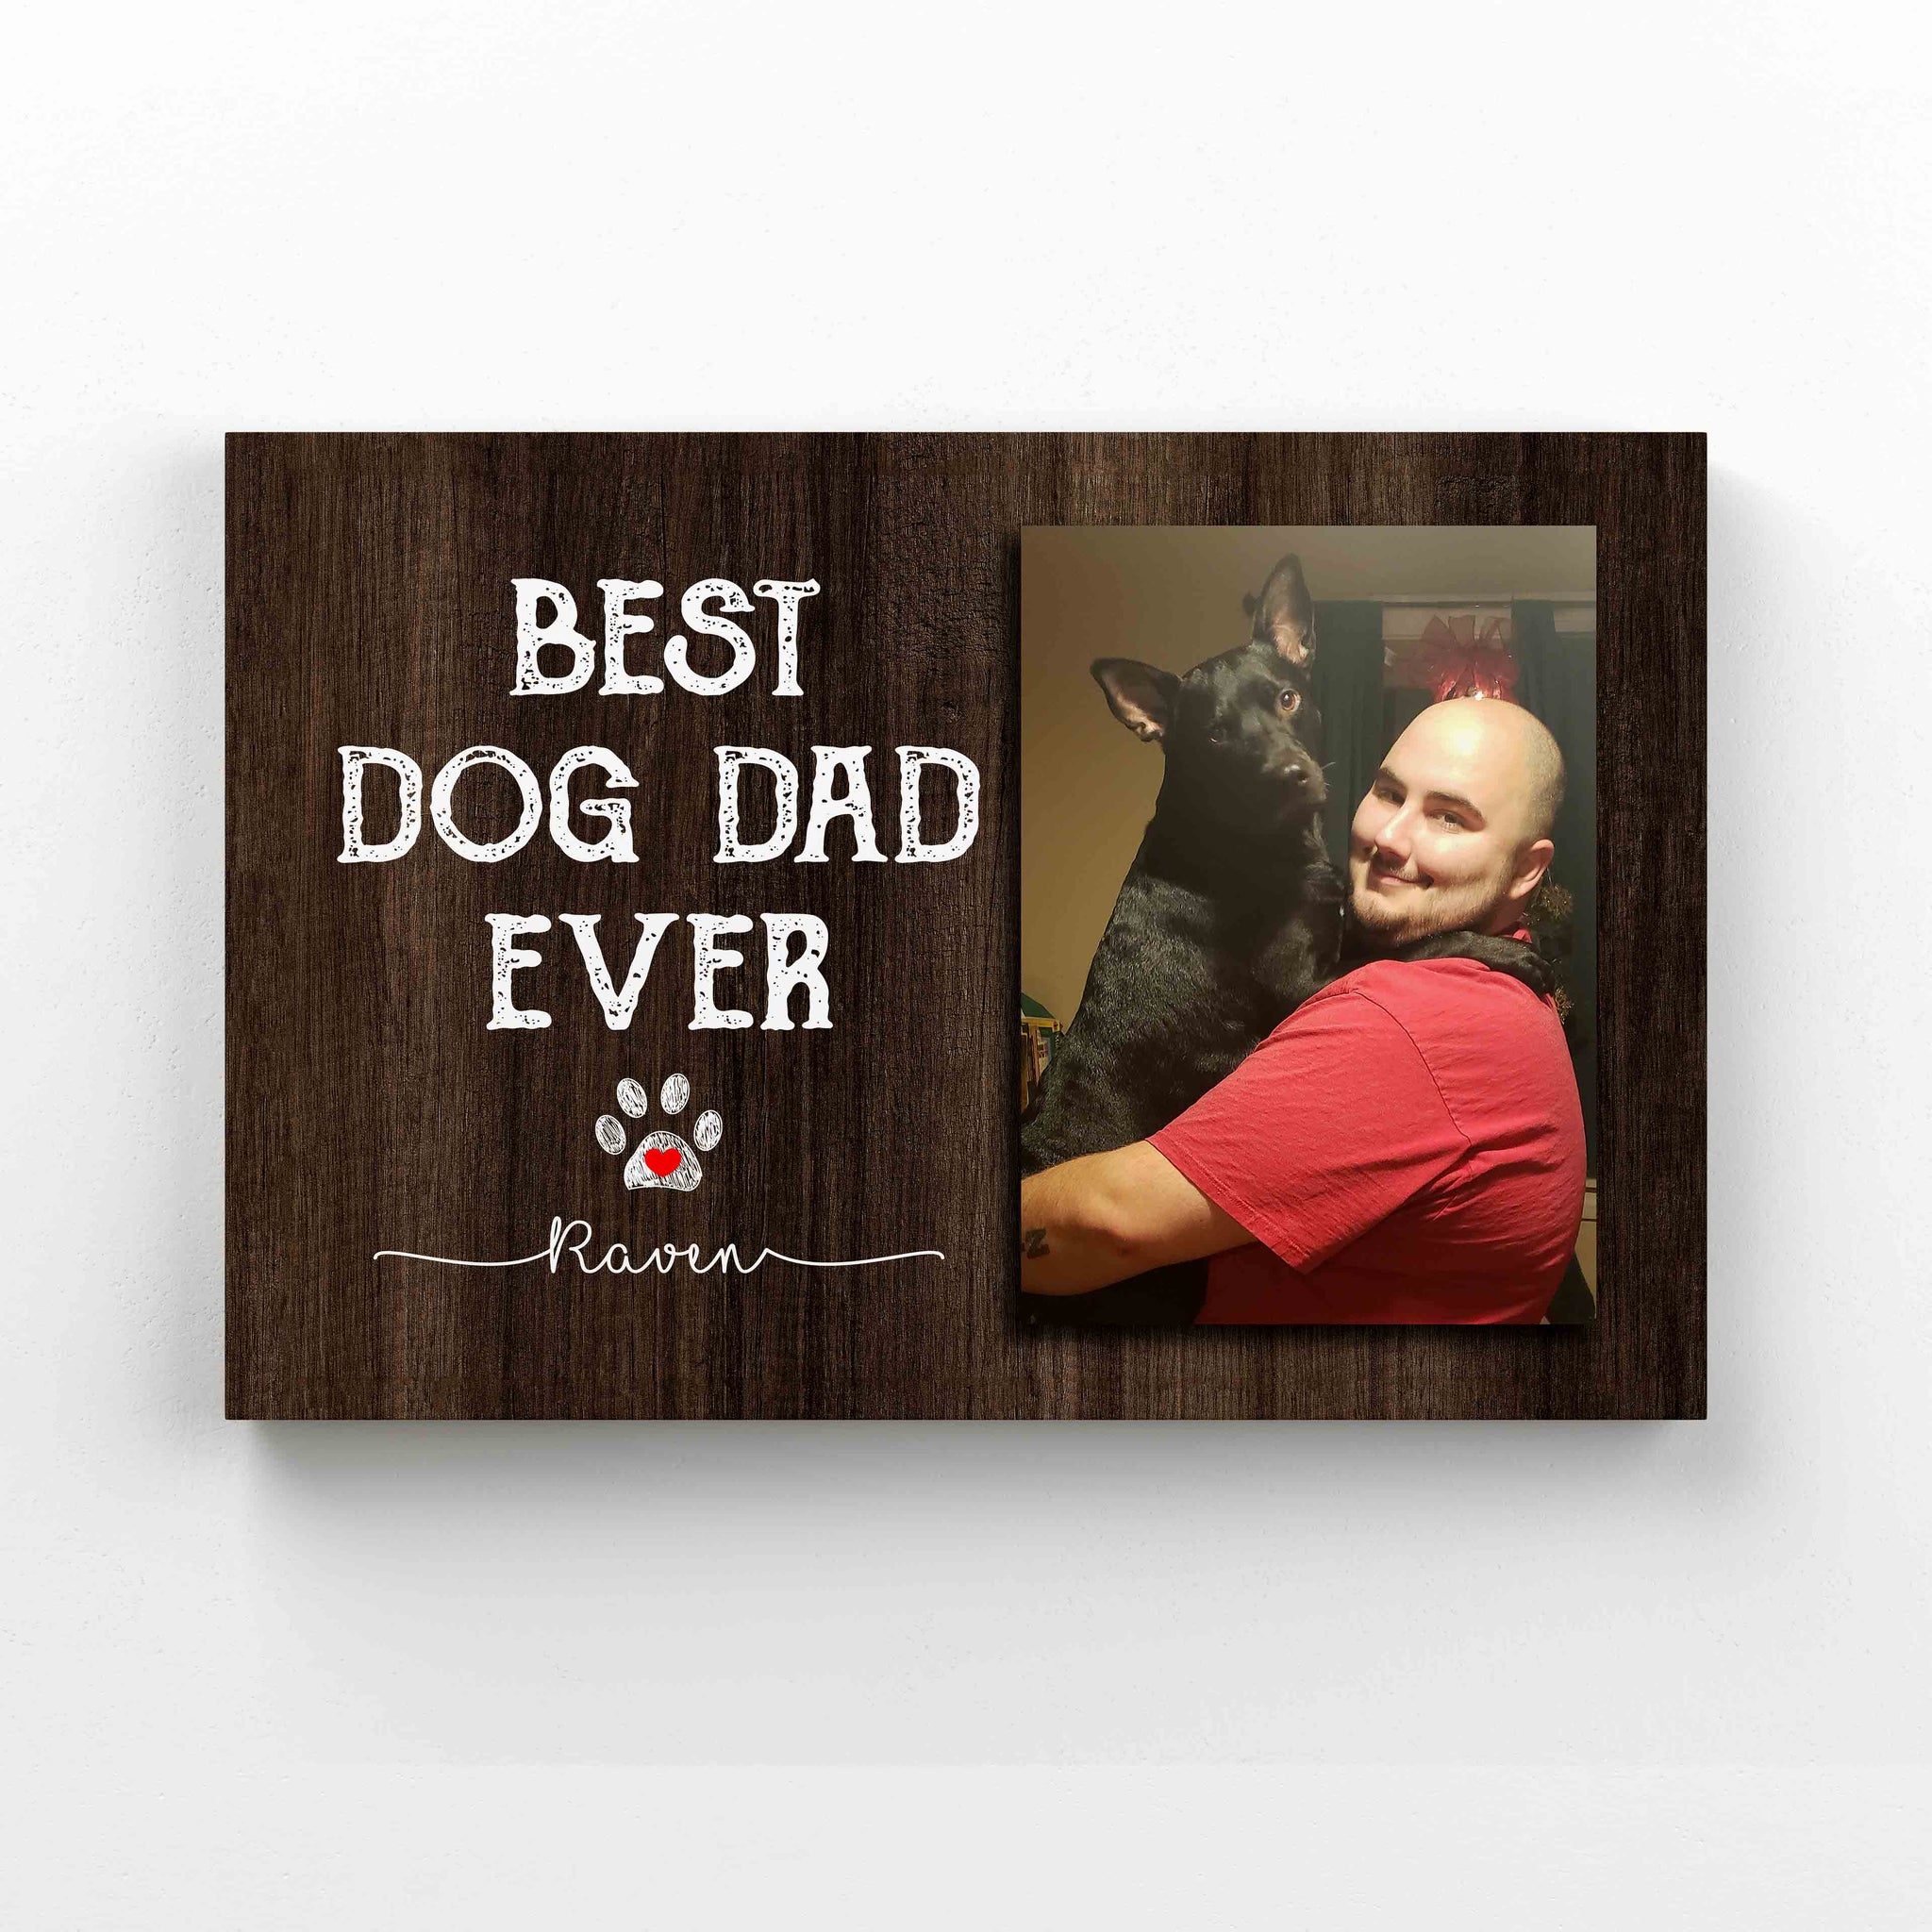 Personalized Image Canvas, Best Dog Dad Ever Canvas, Memorial Canvas, Gift Canvas